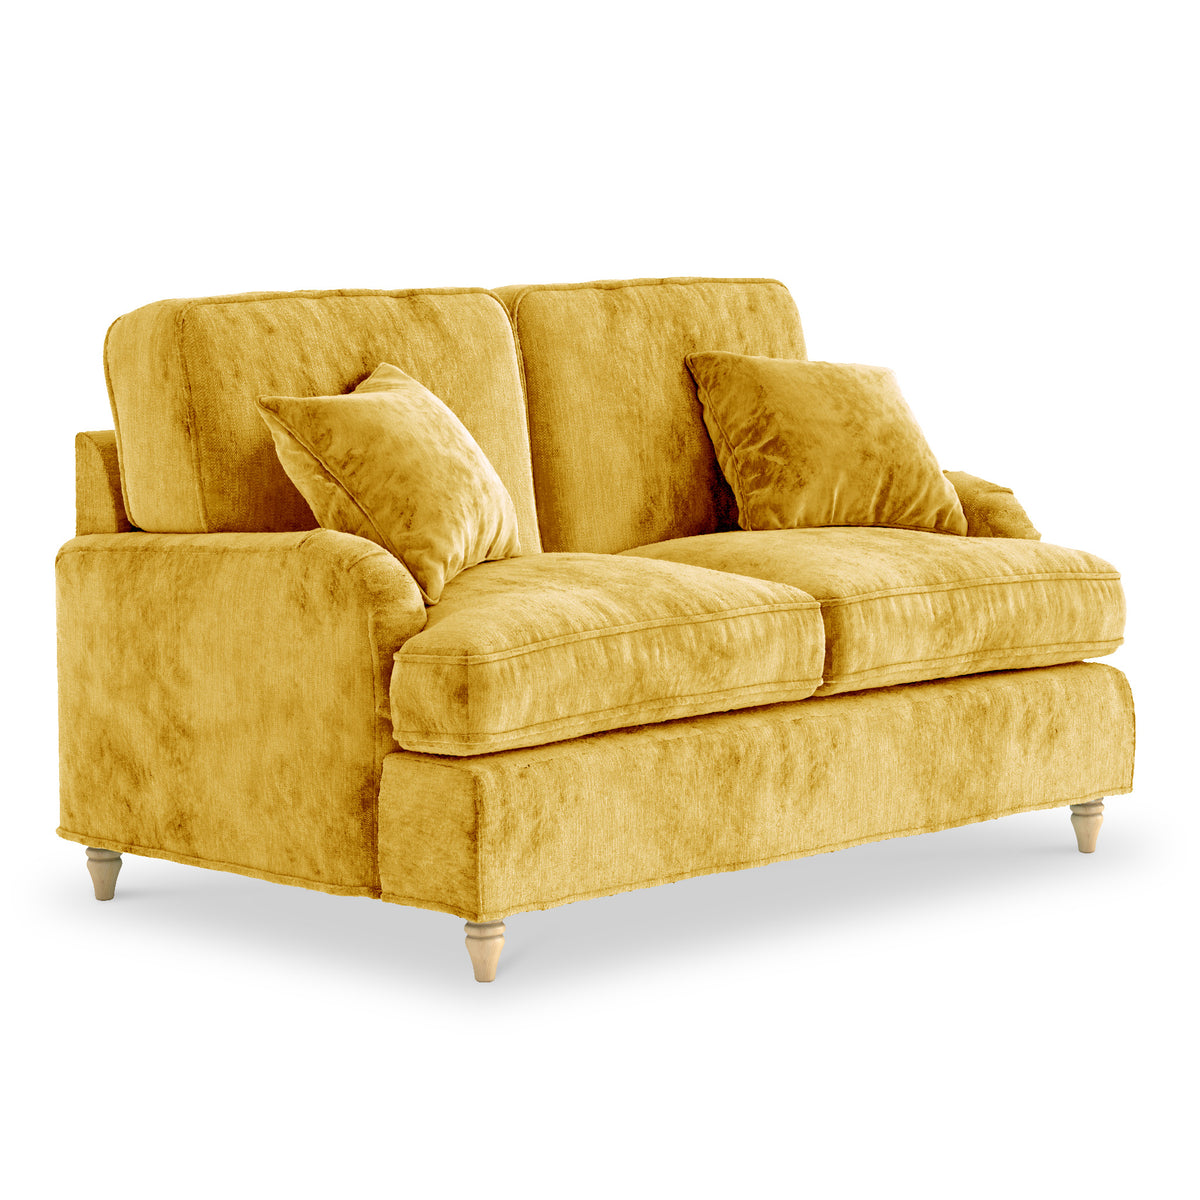 Arthur Gold 2 Seater Sofa from Roseland Furniture